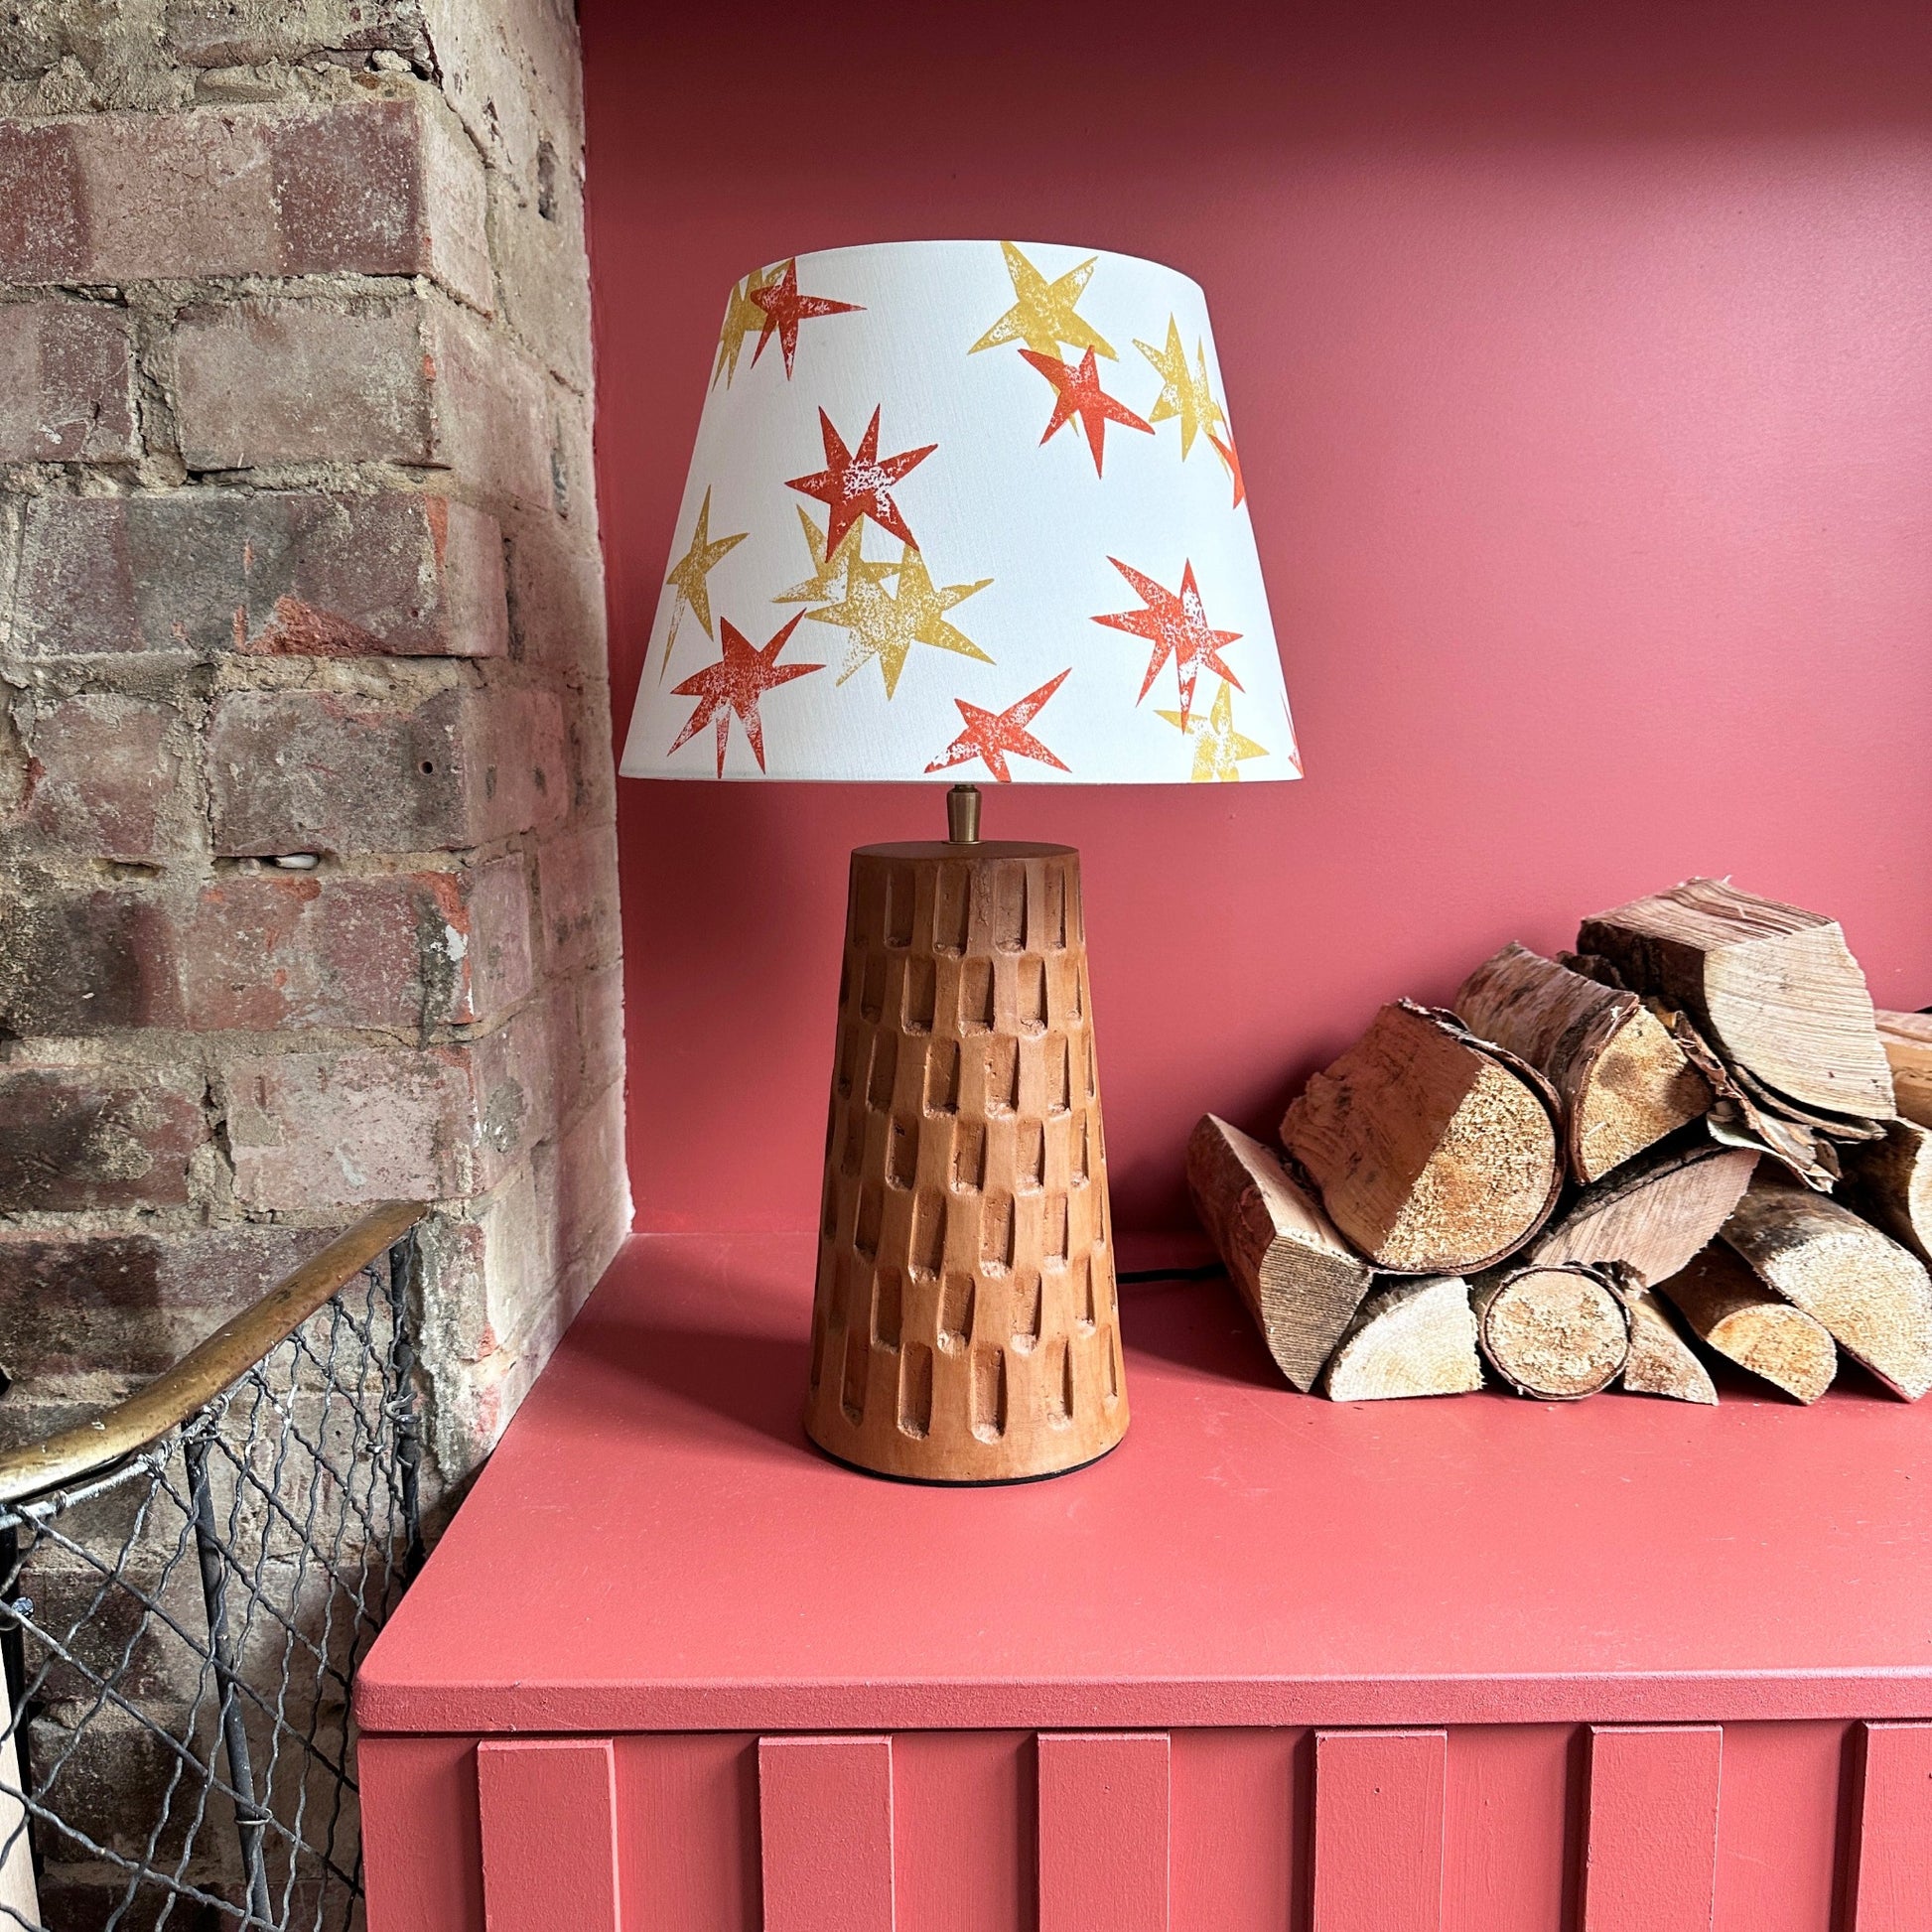 Cream lampshade with orange and yellow stars on brown lamp next to fire place